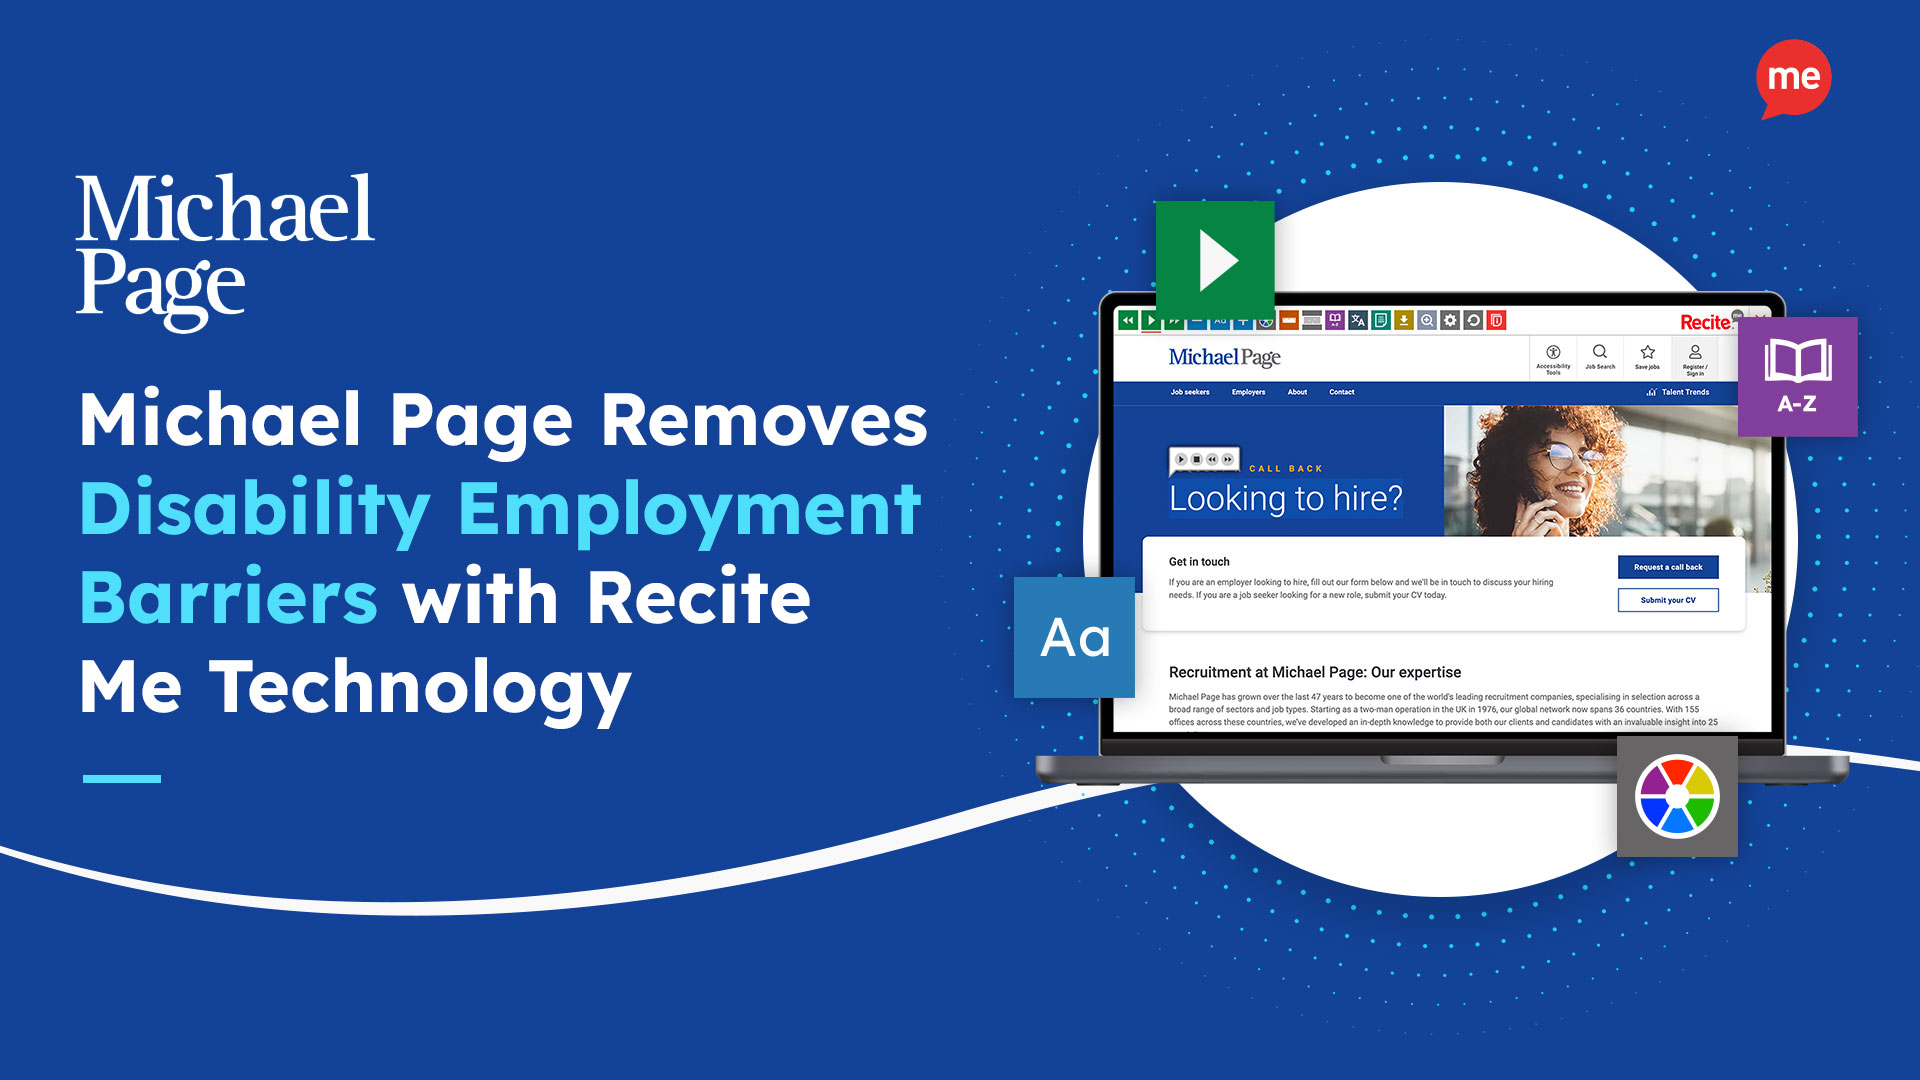 Michael Page Removes Disability Employment Barriers with Recite Me Technology